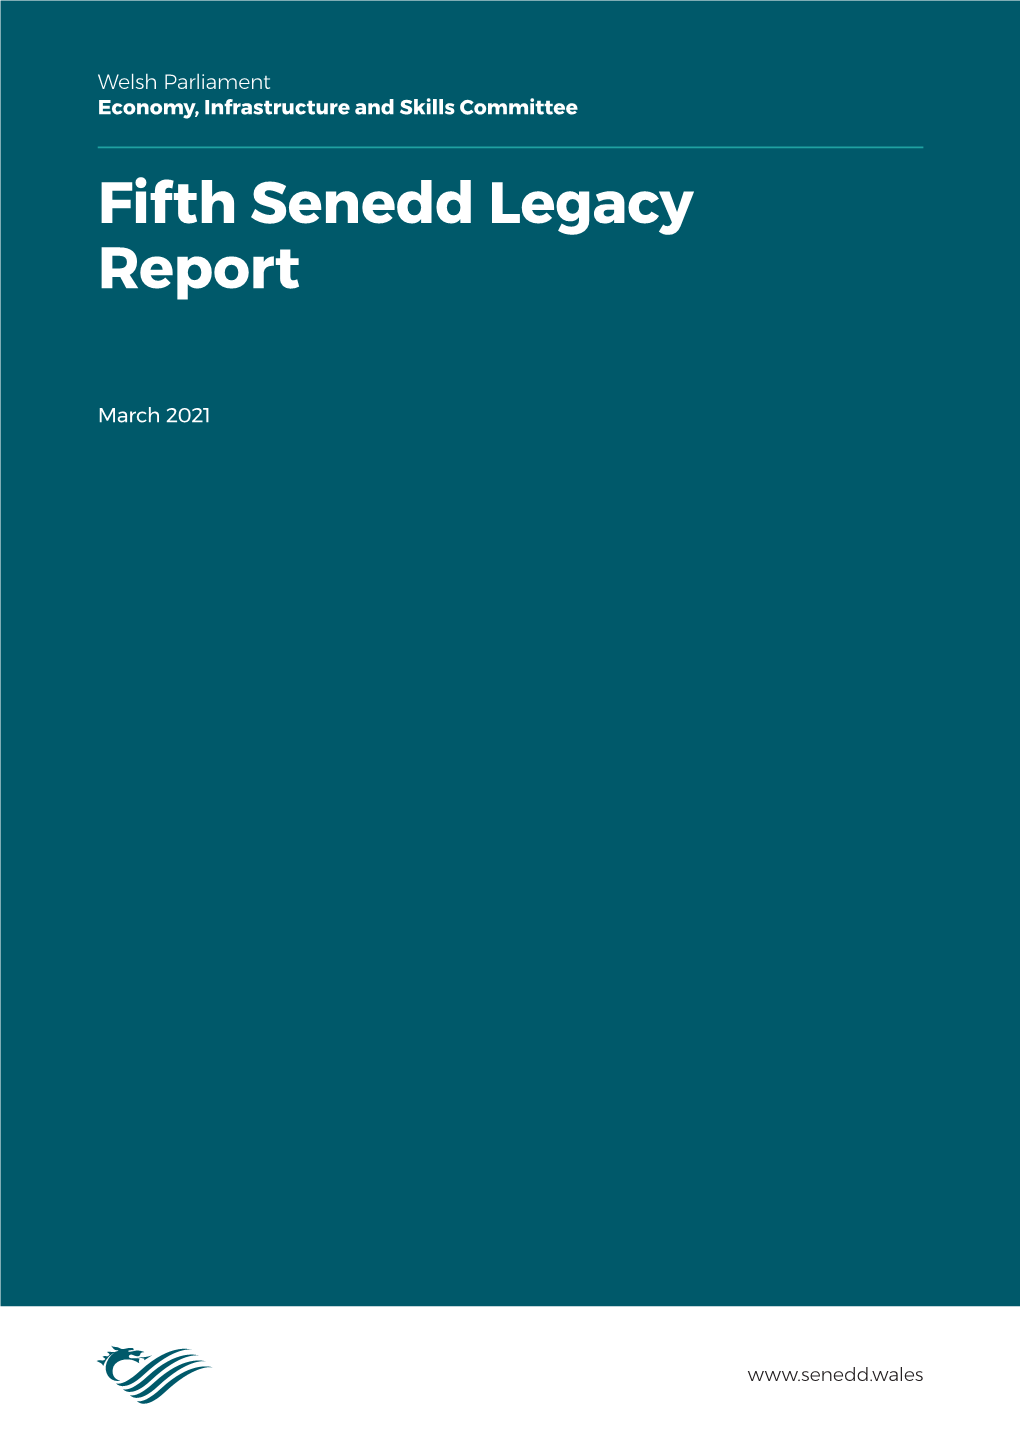 Economy Infrastructure and Skills Committee Legacy Report